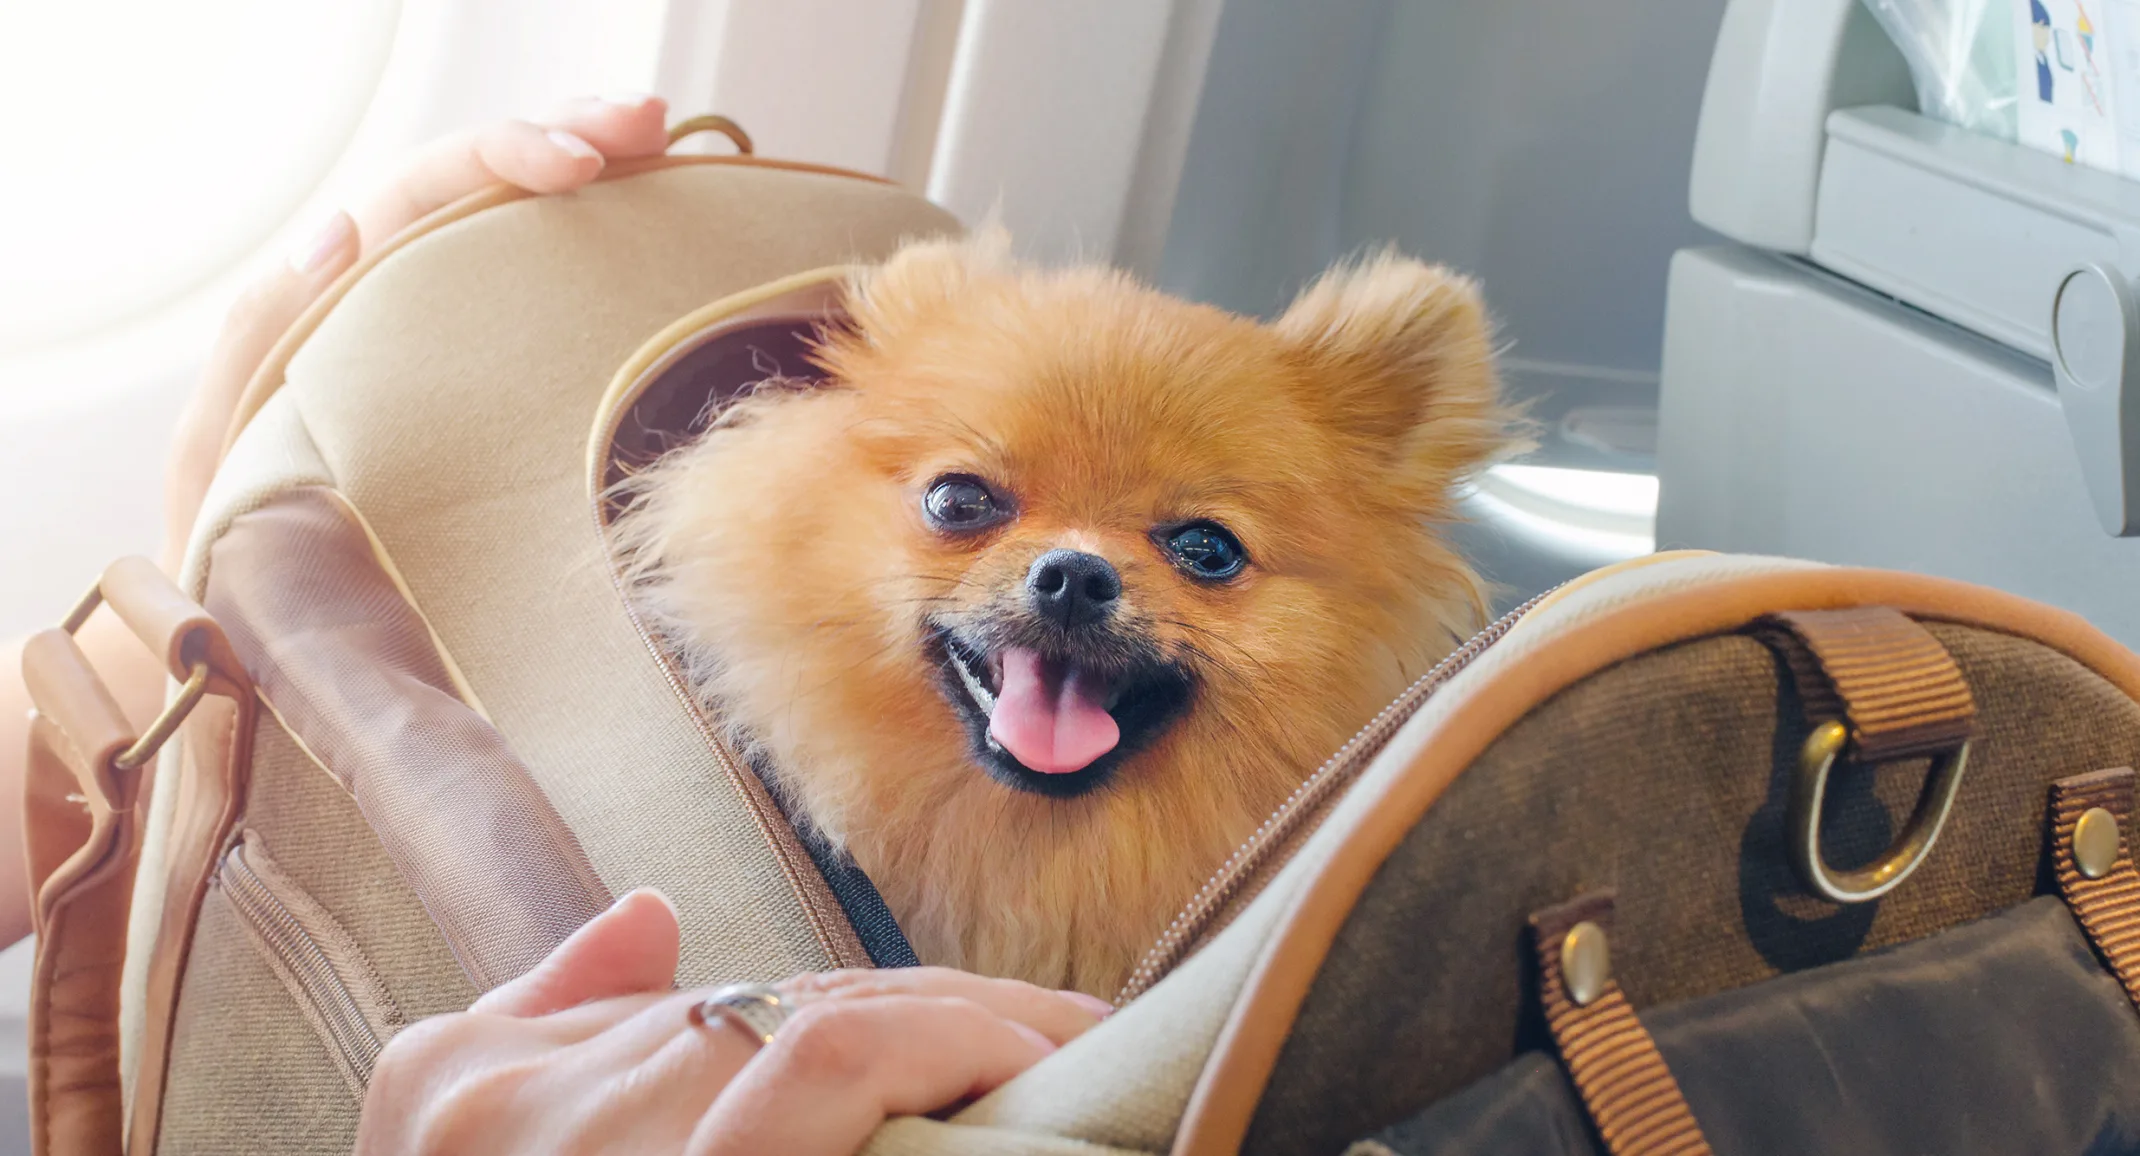 Dog sitting in a carrying case on an airplane